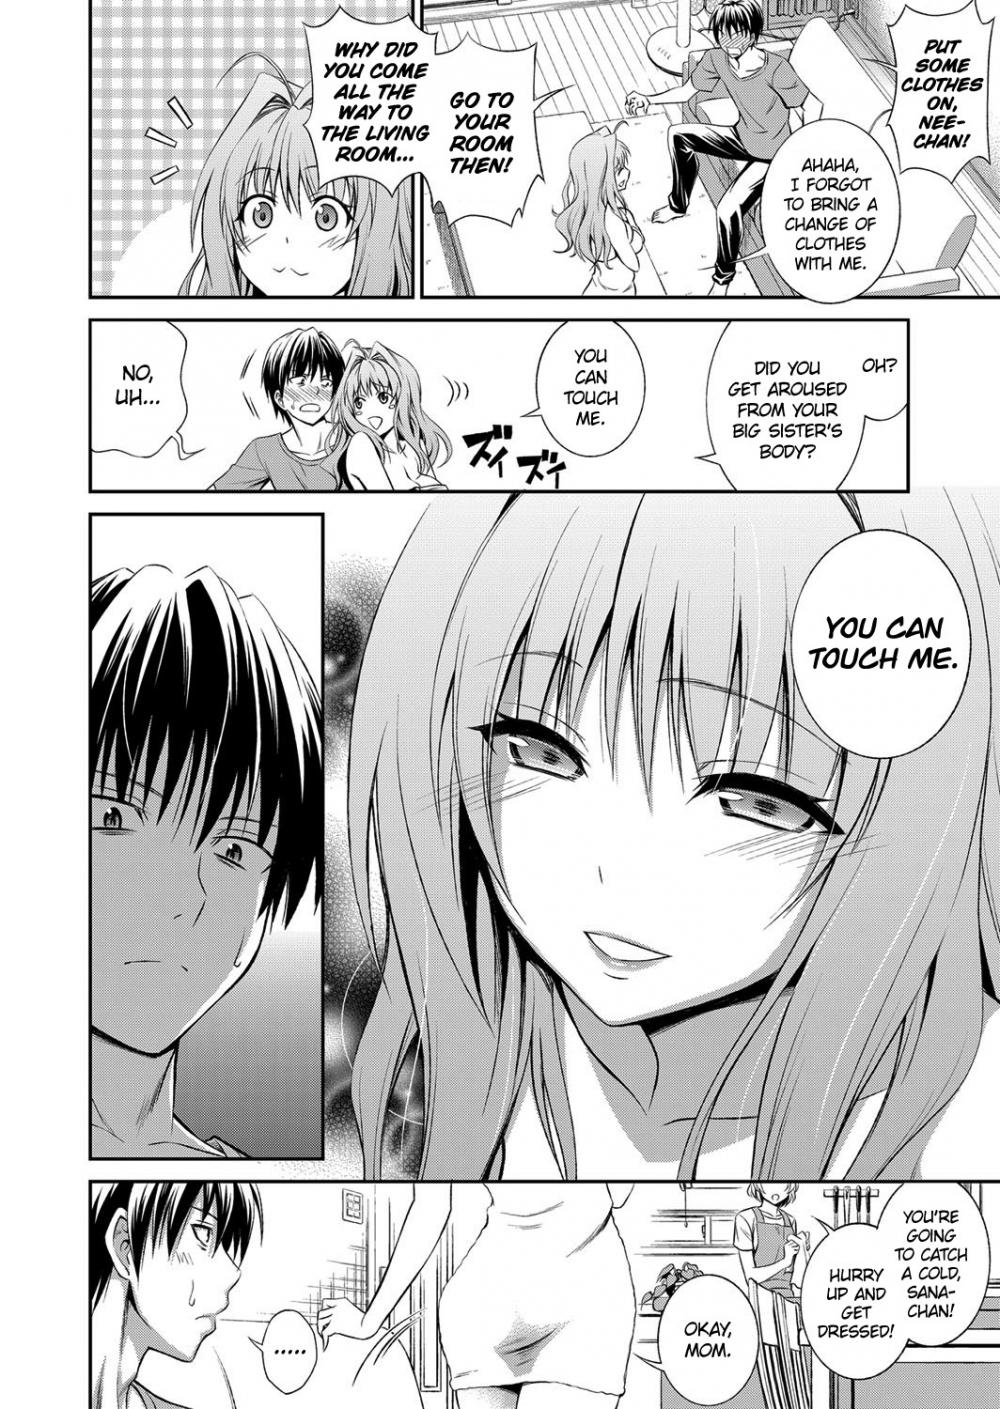 Hentai Manga Comic-My Big Sister often has an Amorous Look on Her Face, and that makes Me Very Nervous-Read-4